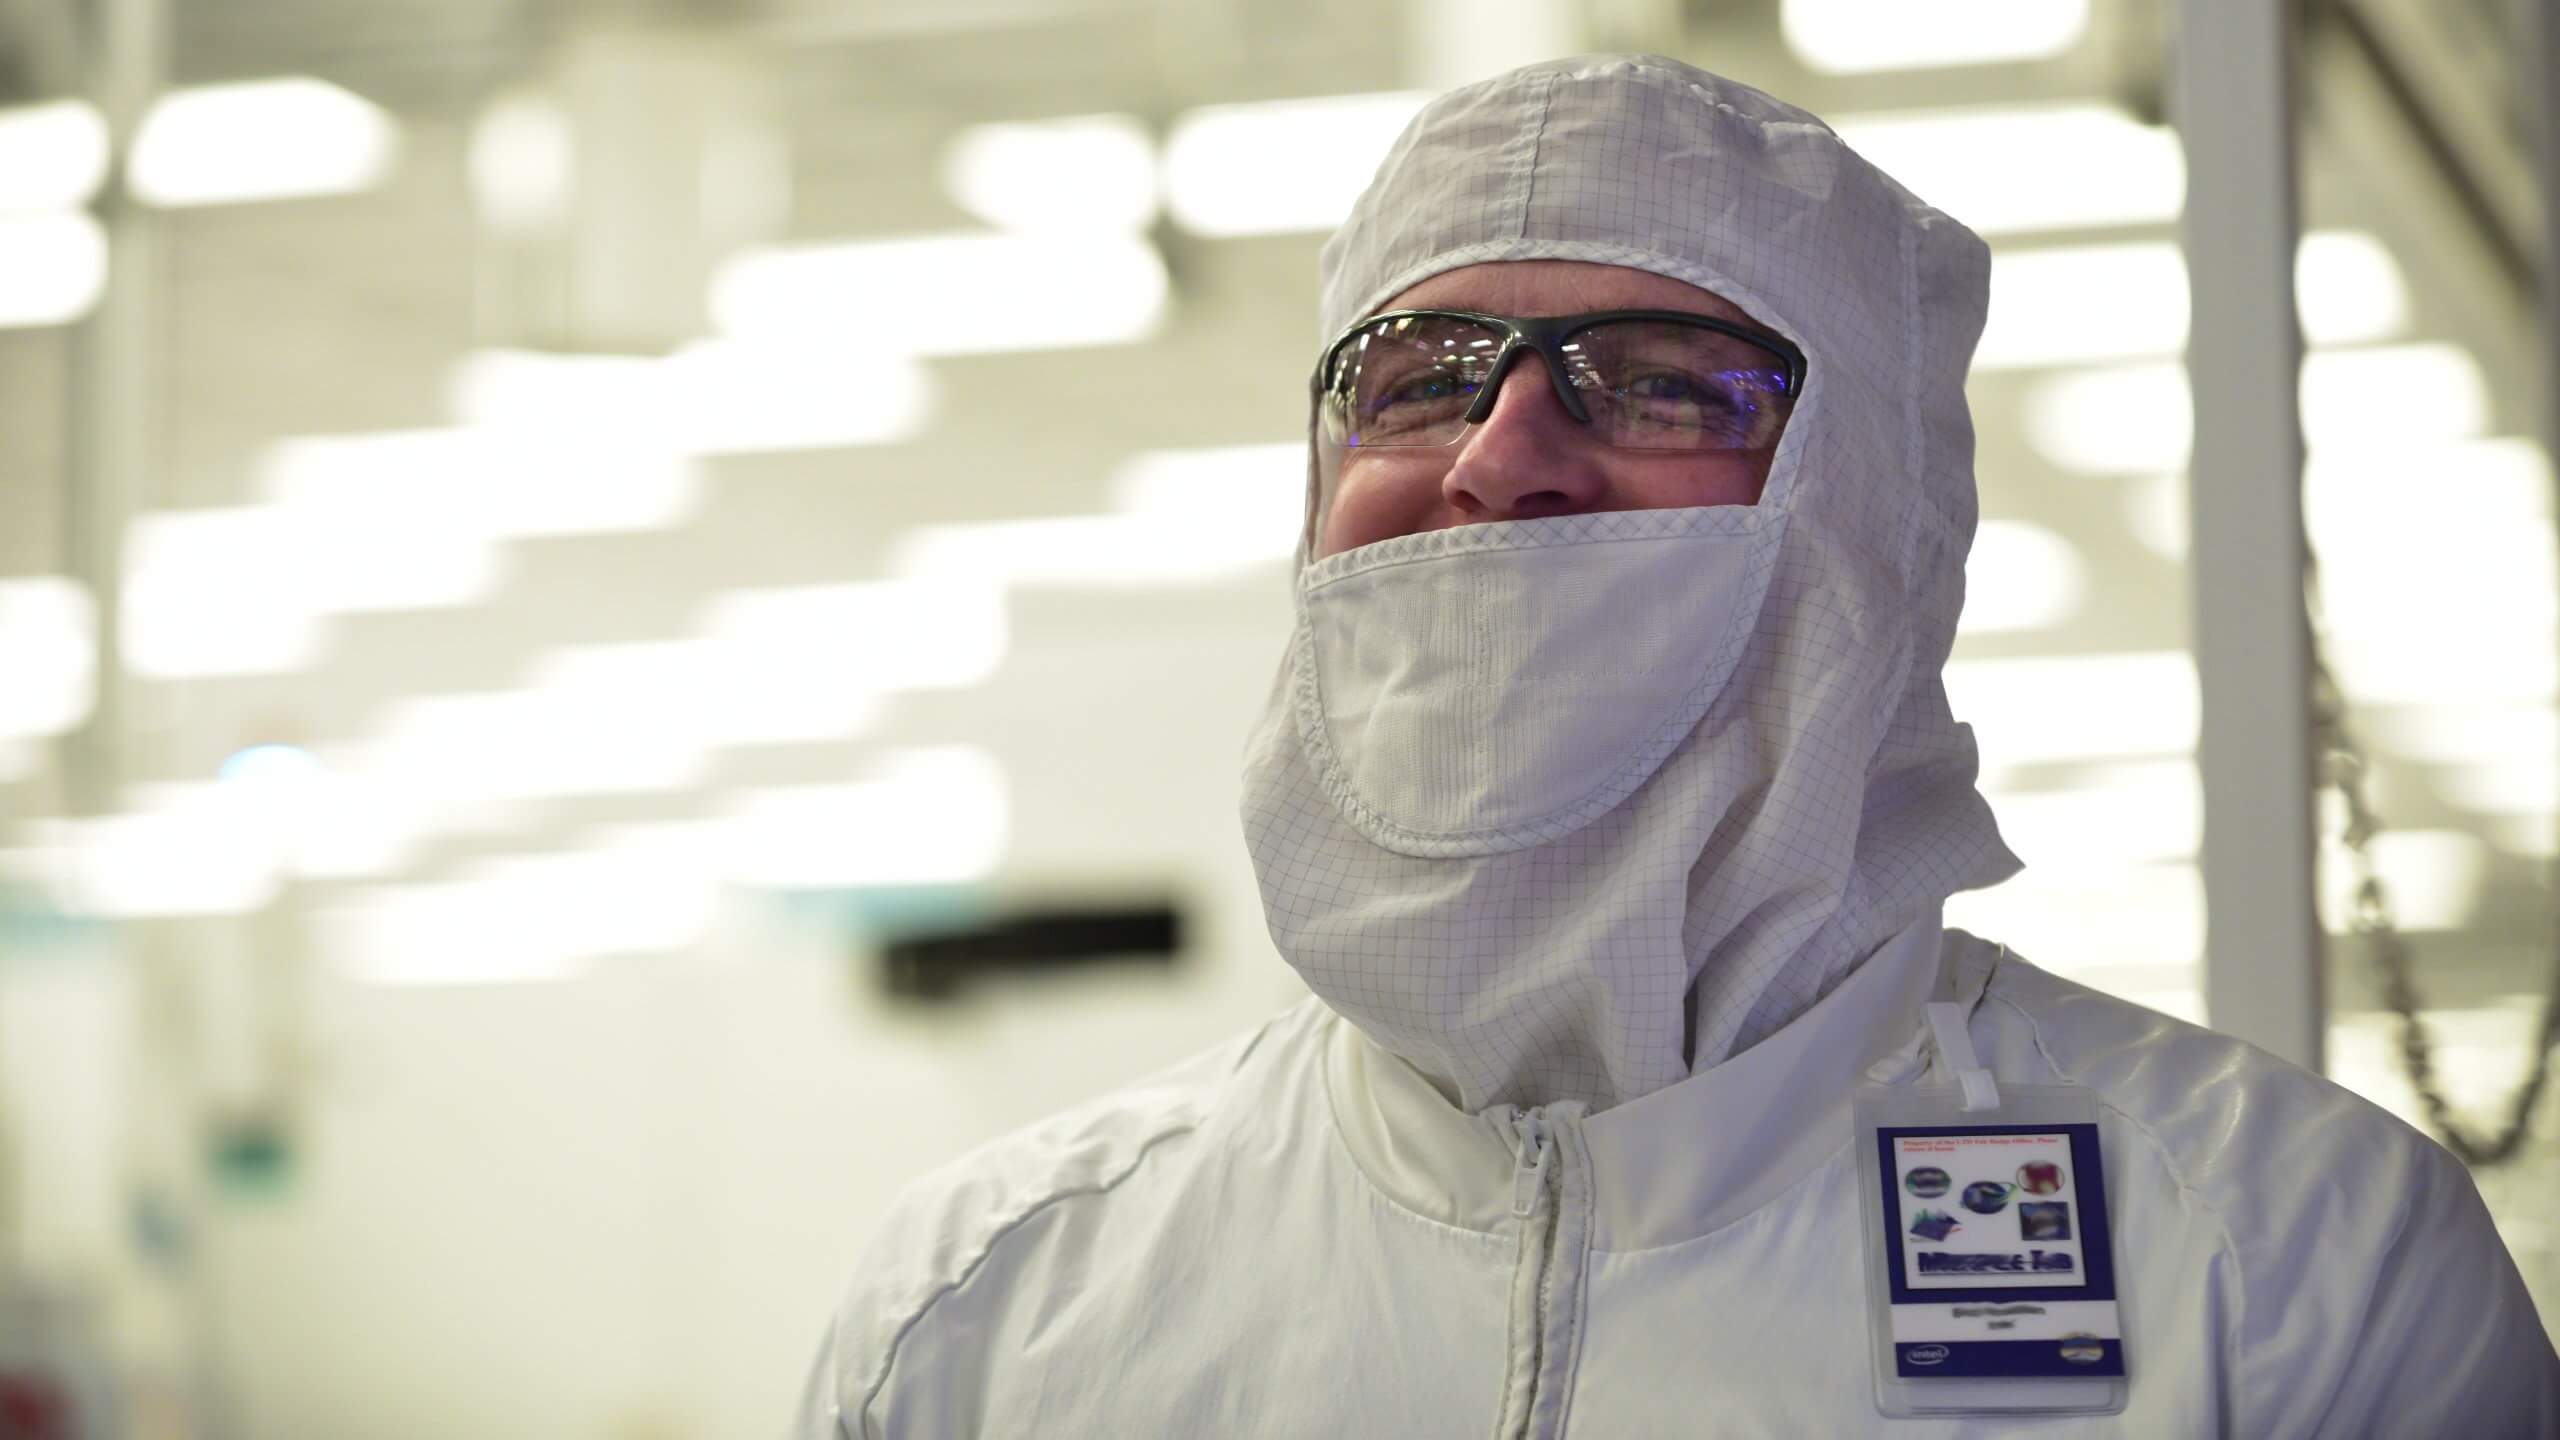 Intel will donate personal protective equipment items to healthcare workers around the globe